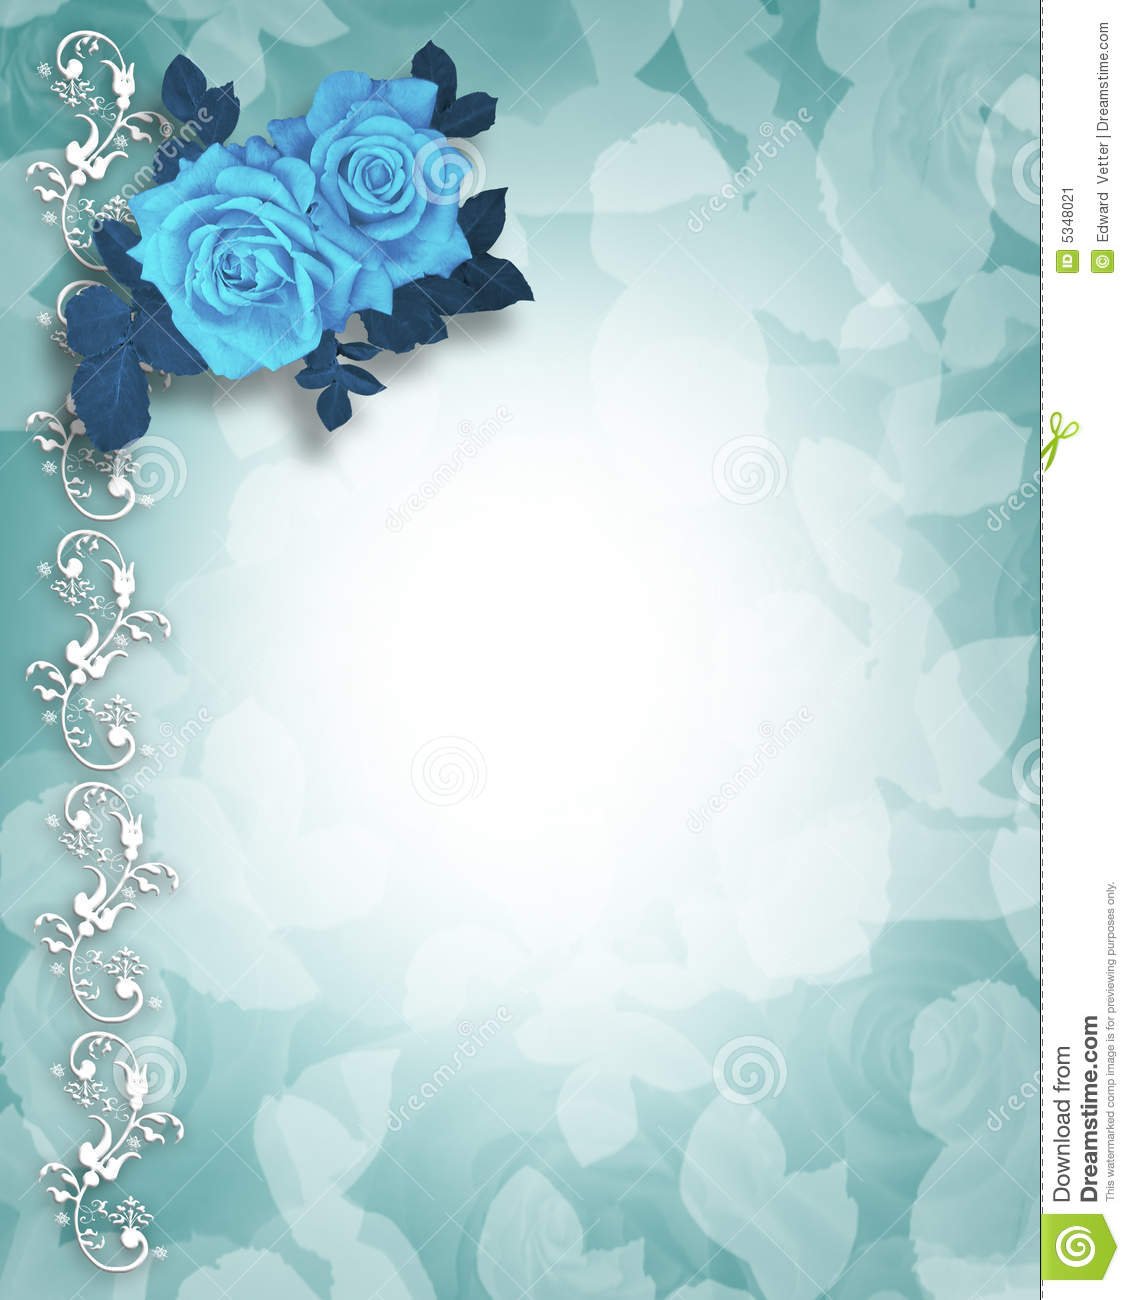 Wedding Or Party Invitation Blue Roses Stock Image